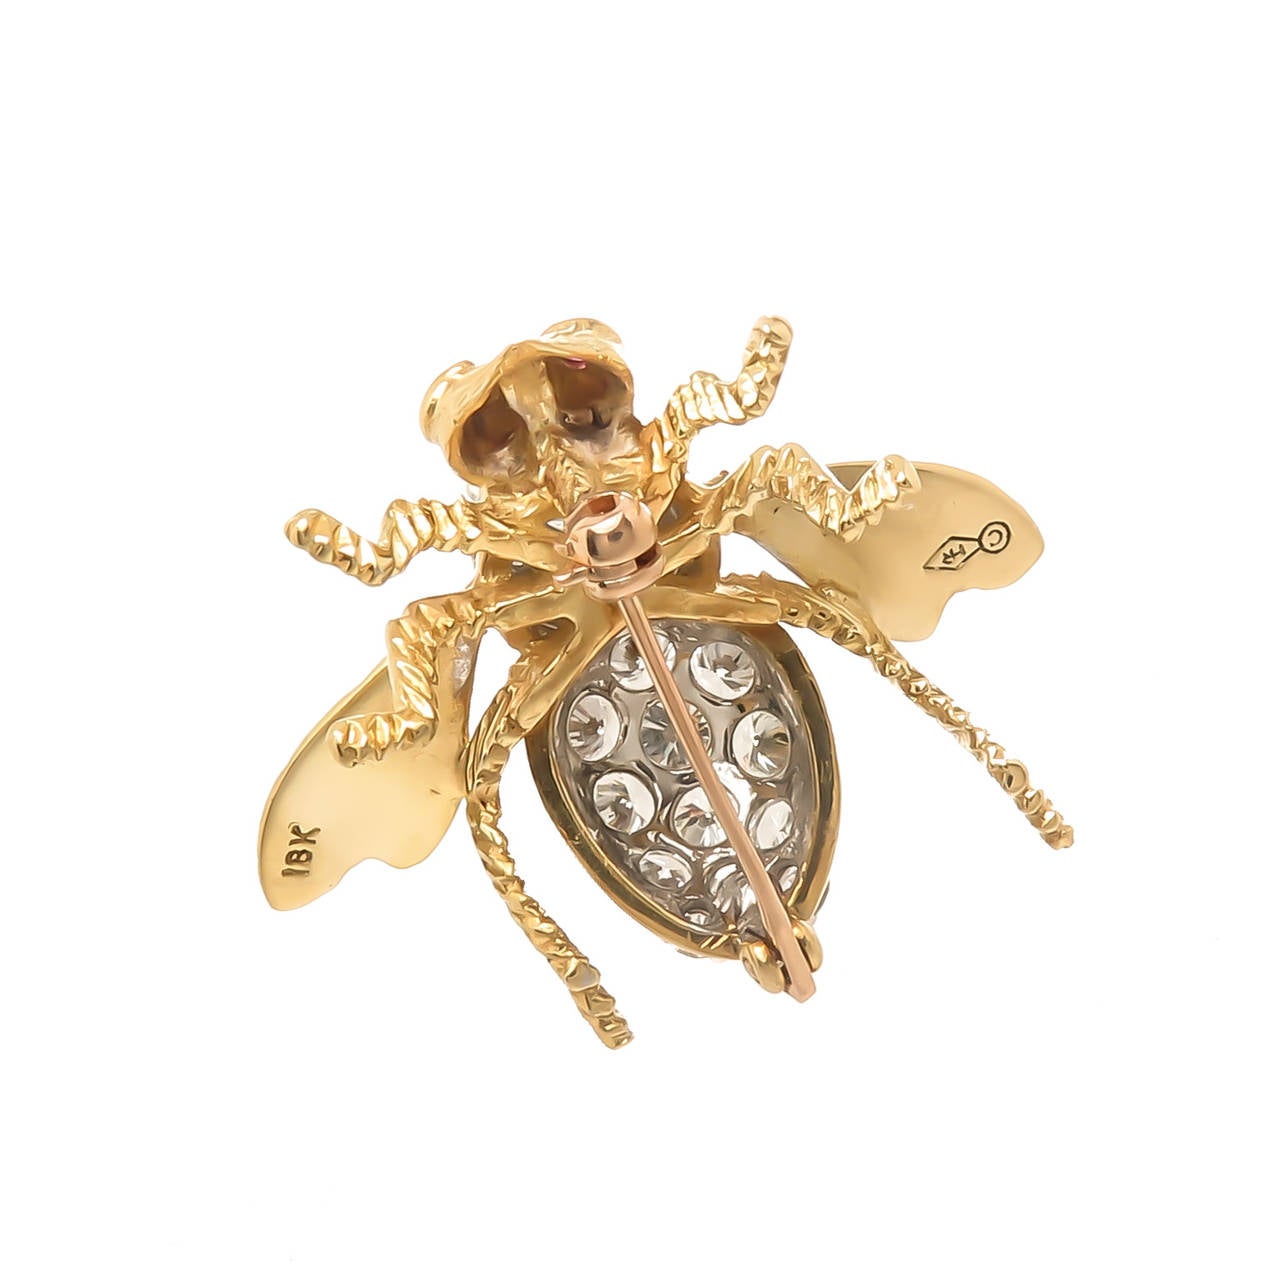 Circa 1980s Herbert Rosenthal 18K Yellow Gold and Diamond Bee Brooch, measuring 1 1/8 inch in length and 1 1/4 inch wide. set with round Brilliant cut Diamonds that are G in color and VS in clarity and total  3 carats. Nicely detailed with a